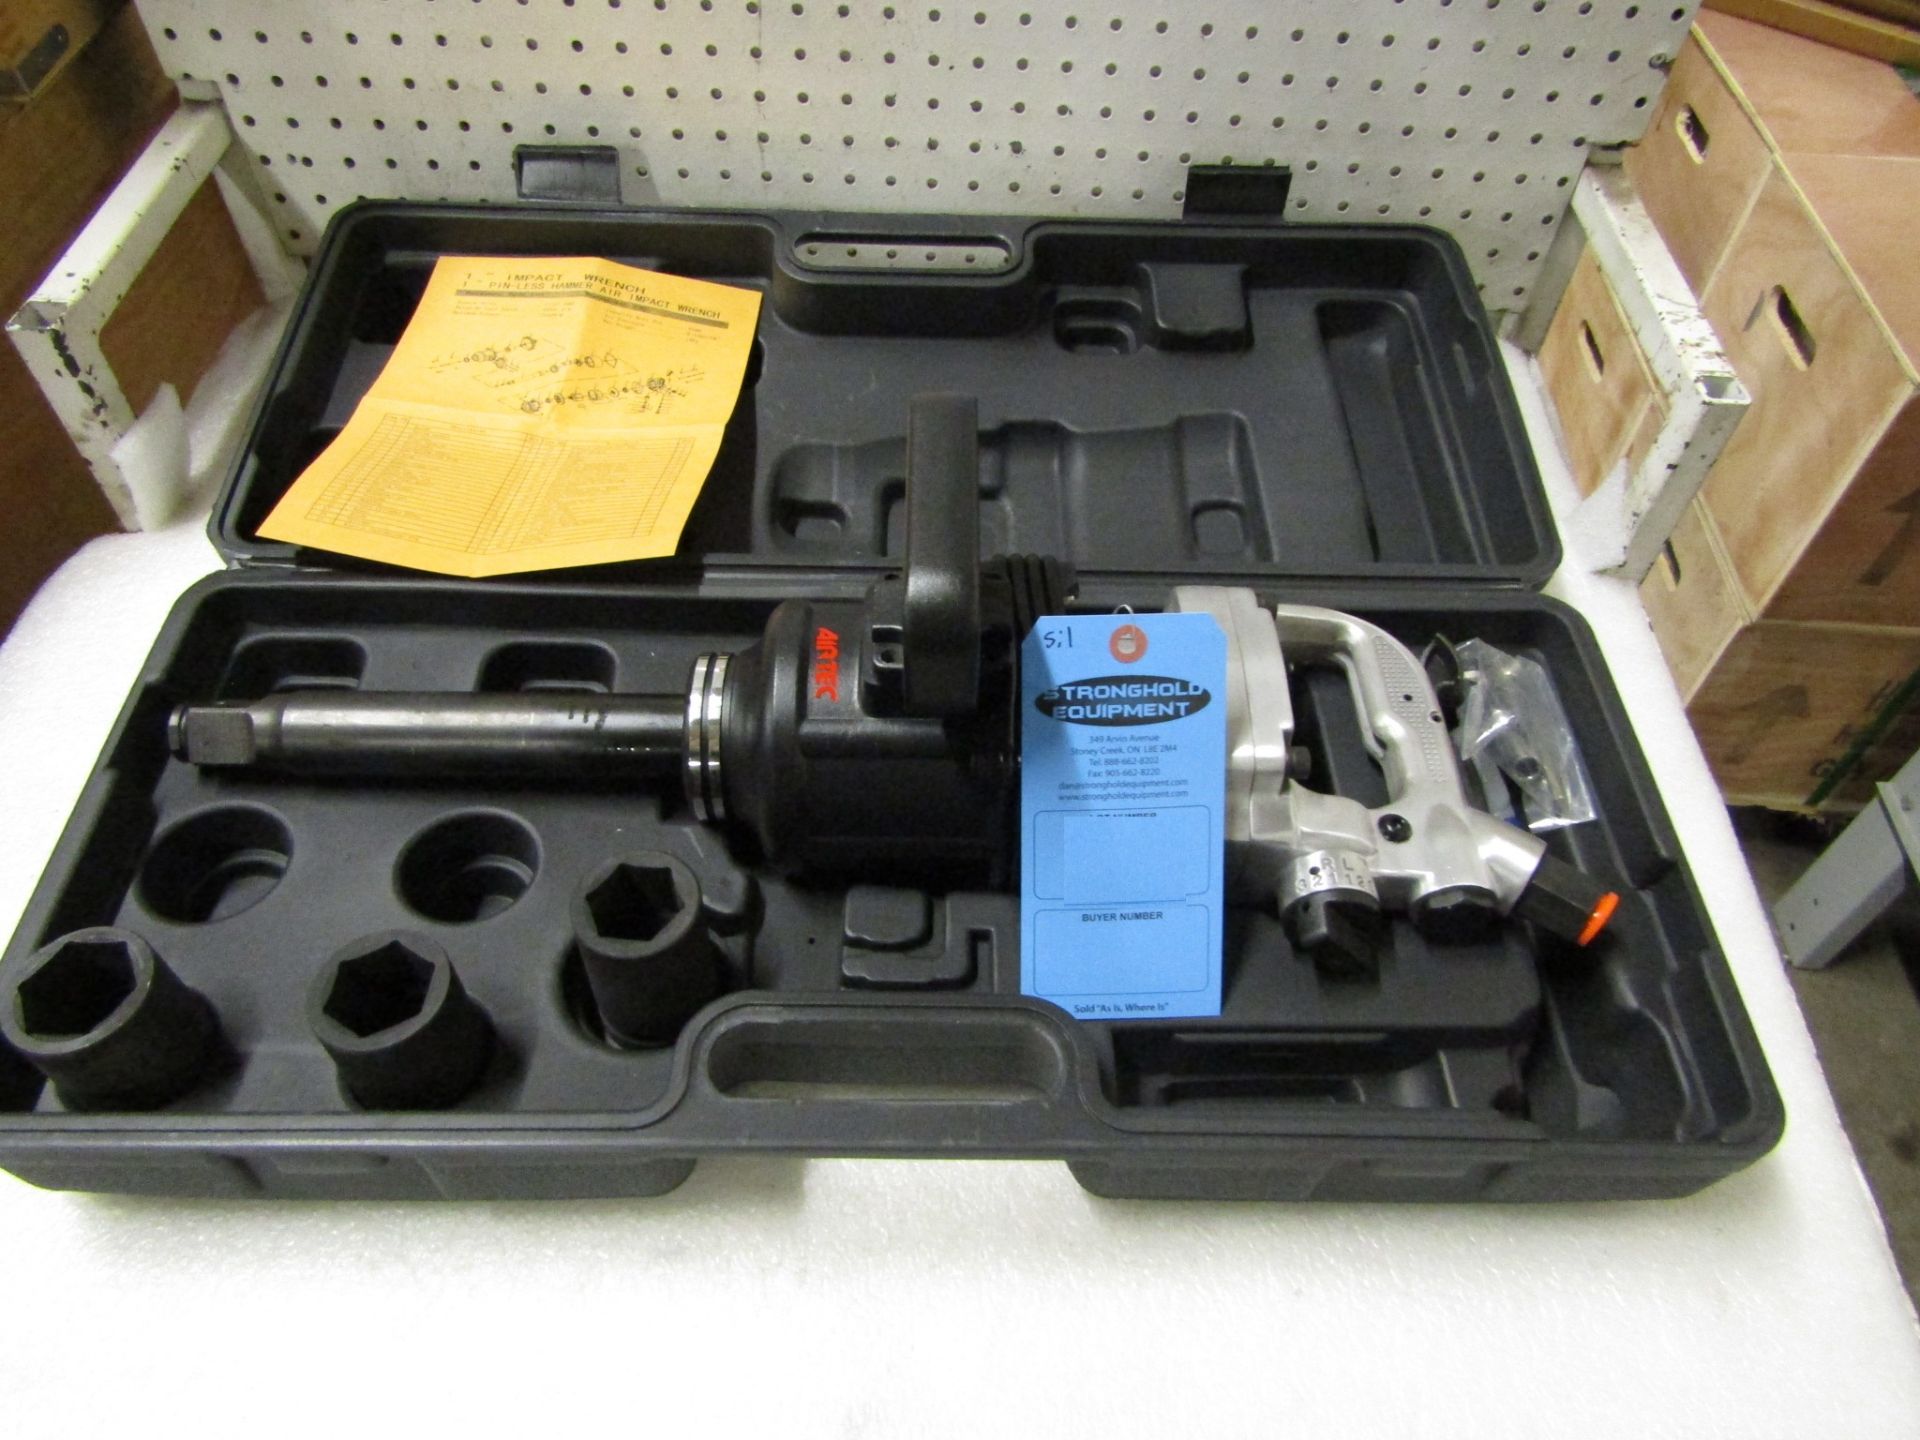 Airtec Extended Reach 1" Drive Air Impact Wrench - MINT UNUSED impact gun complete with sockets in